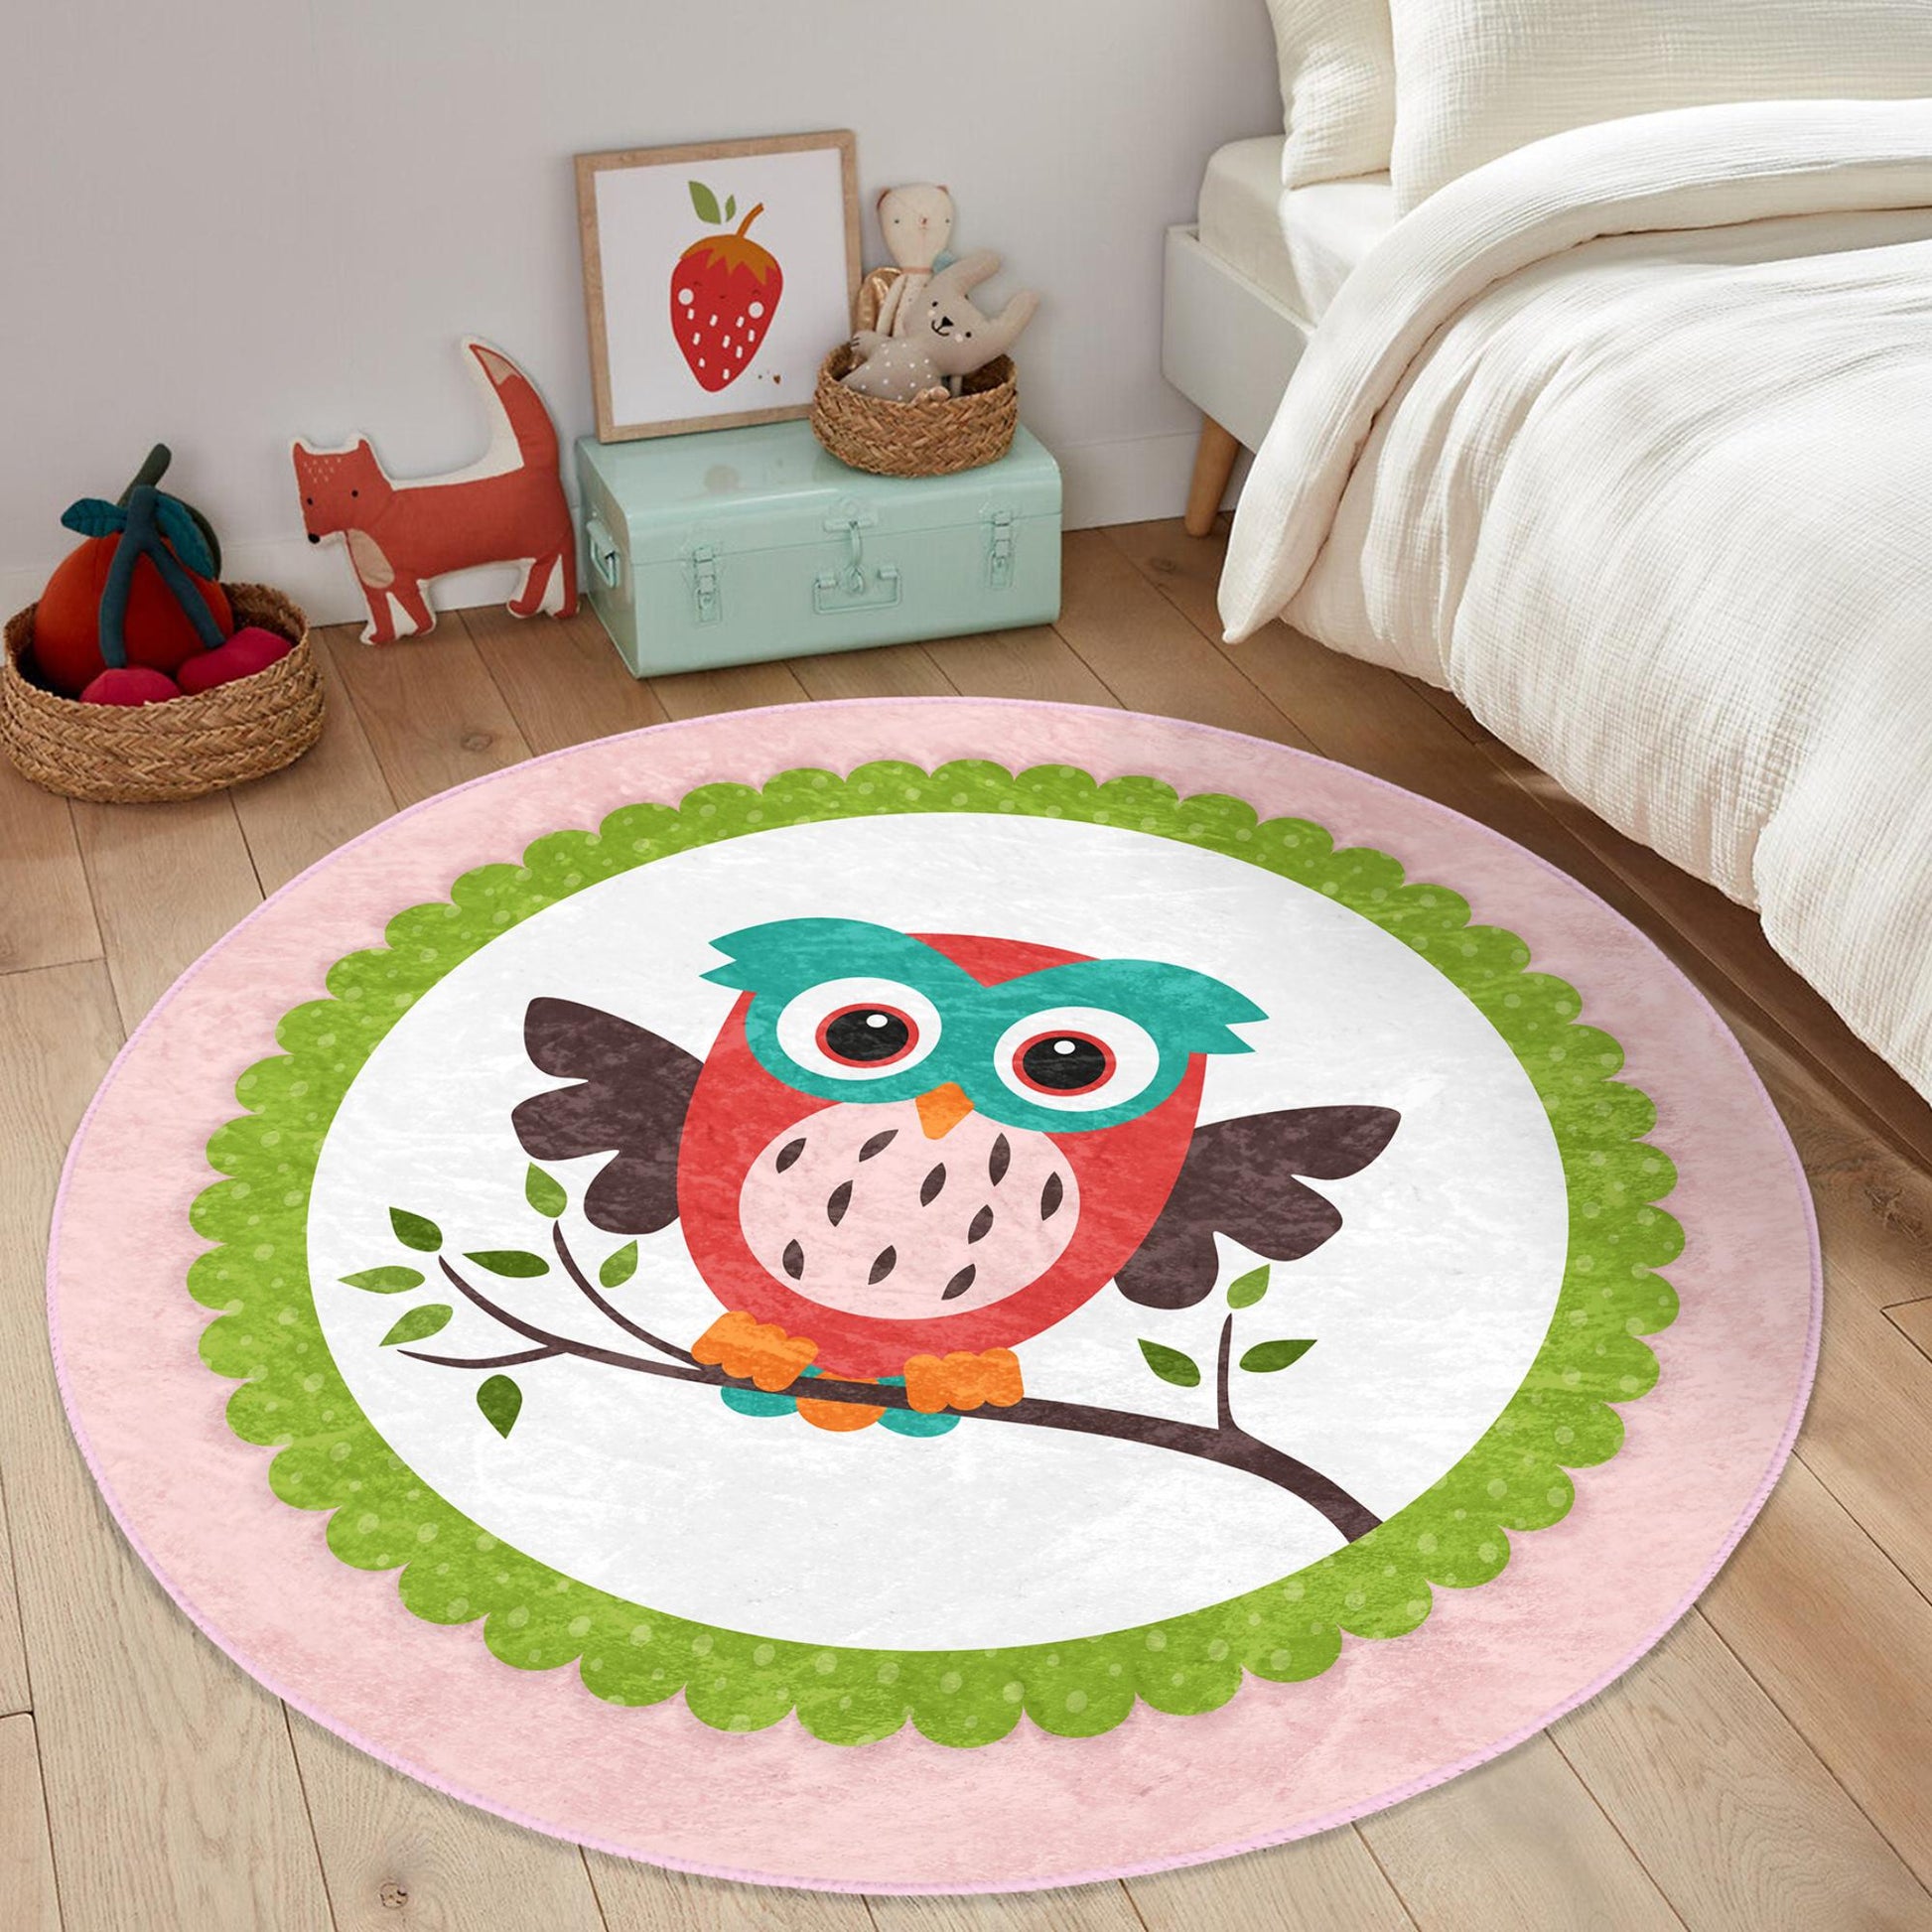 Charming baby room rug adorned with sweet baby owl prints.